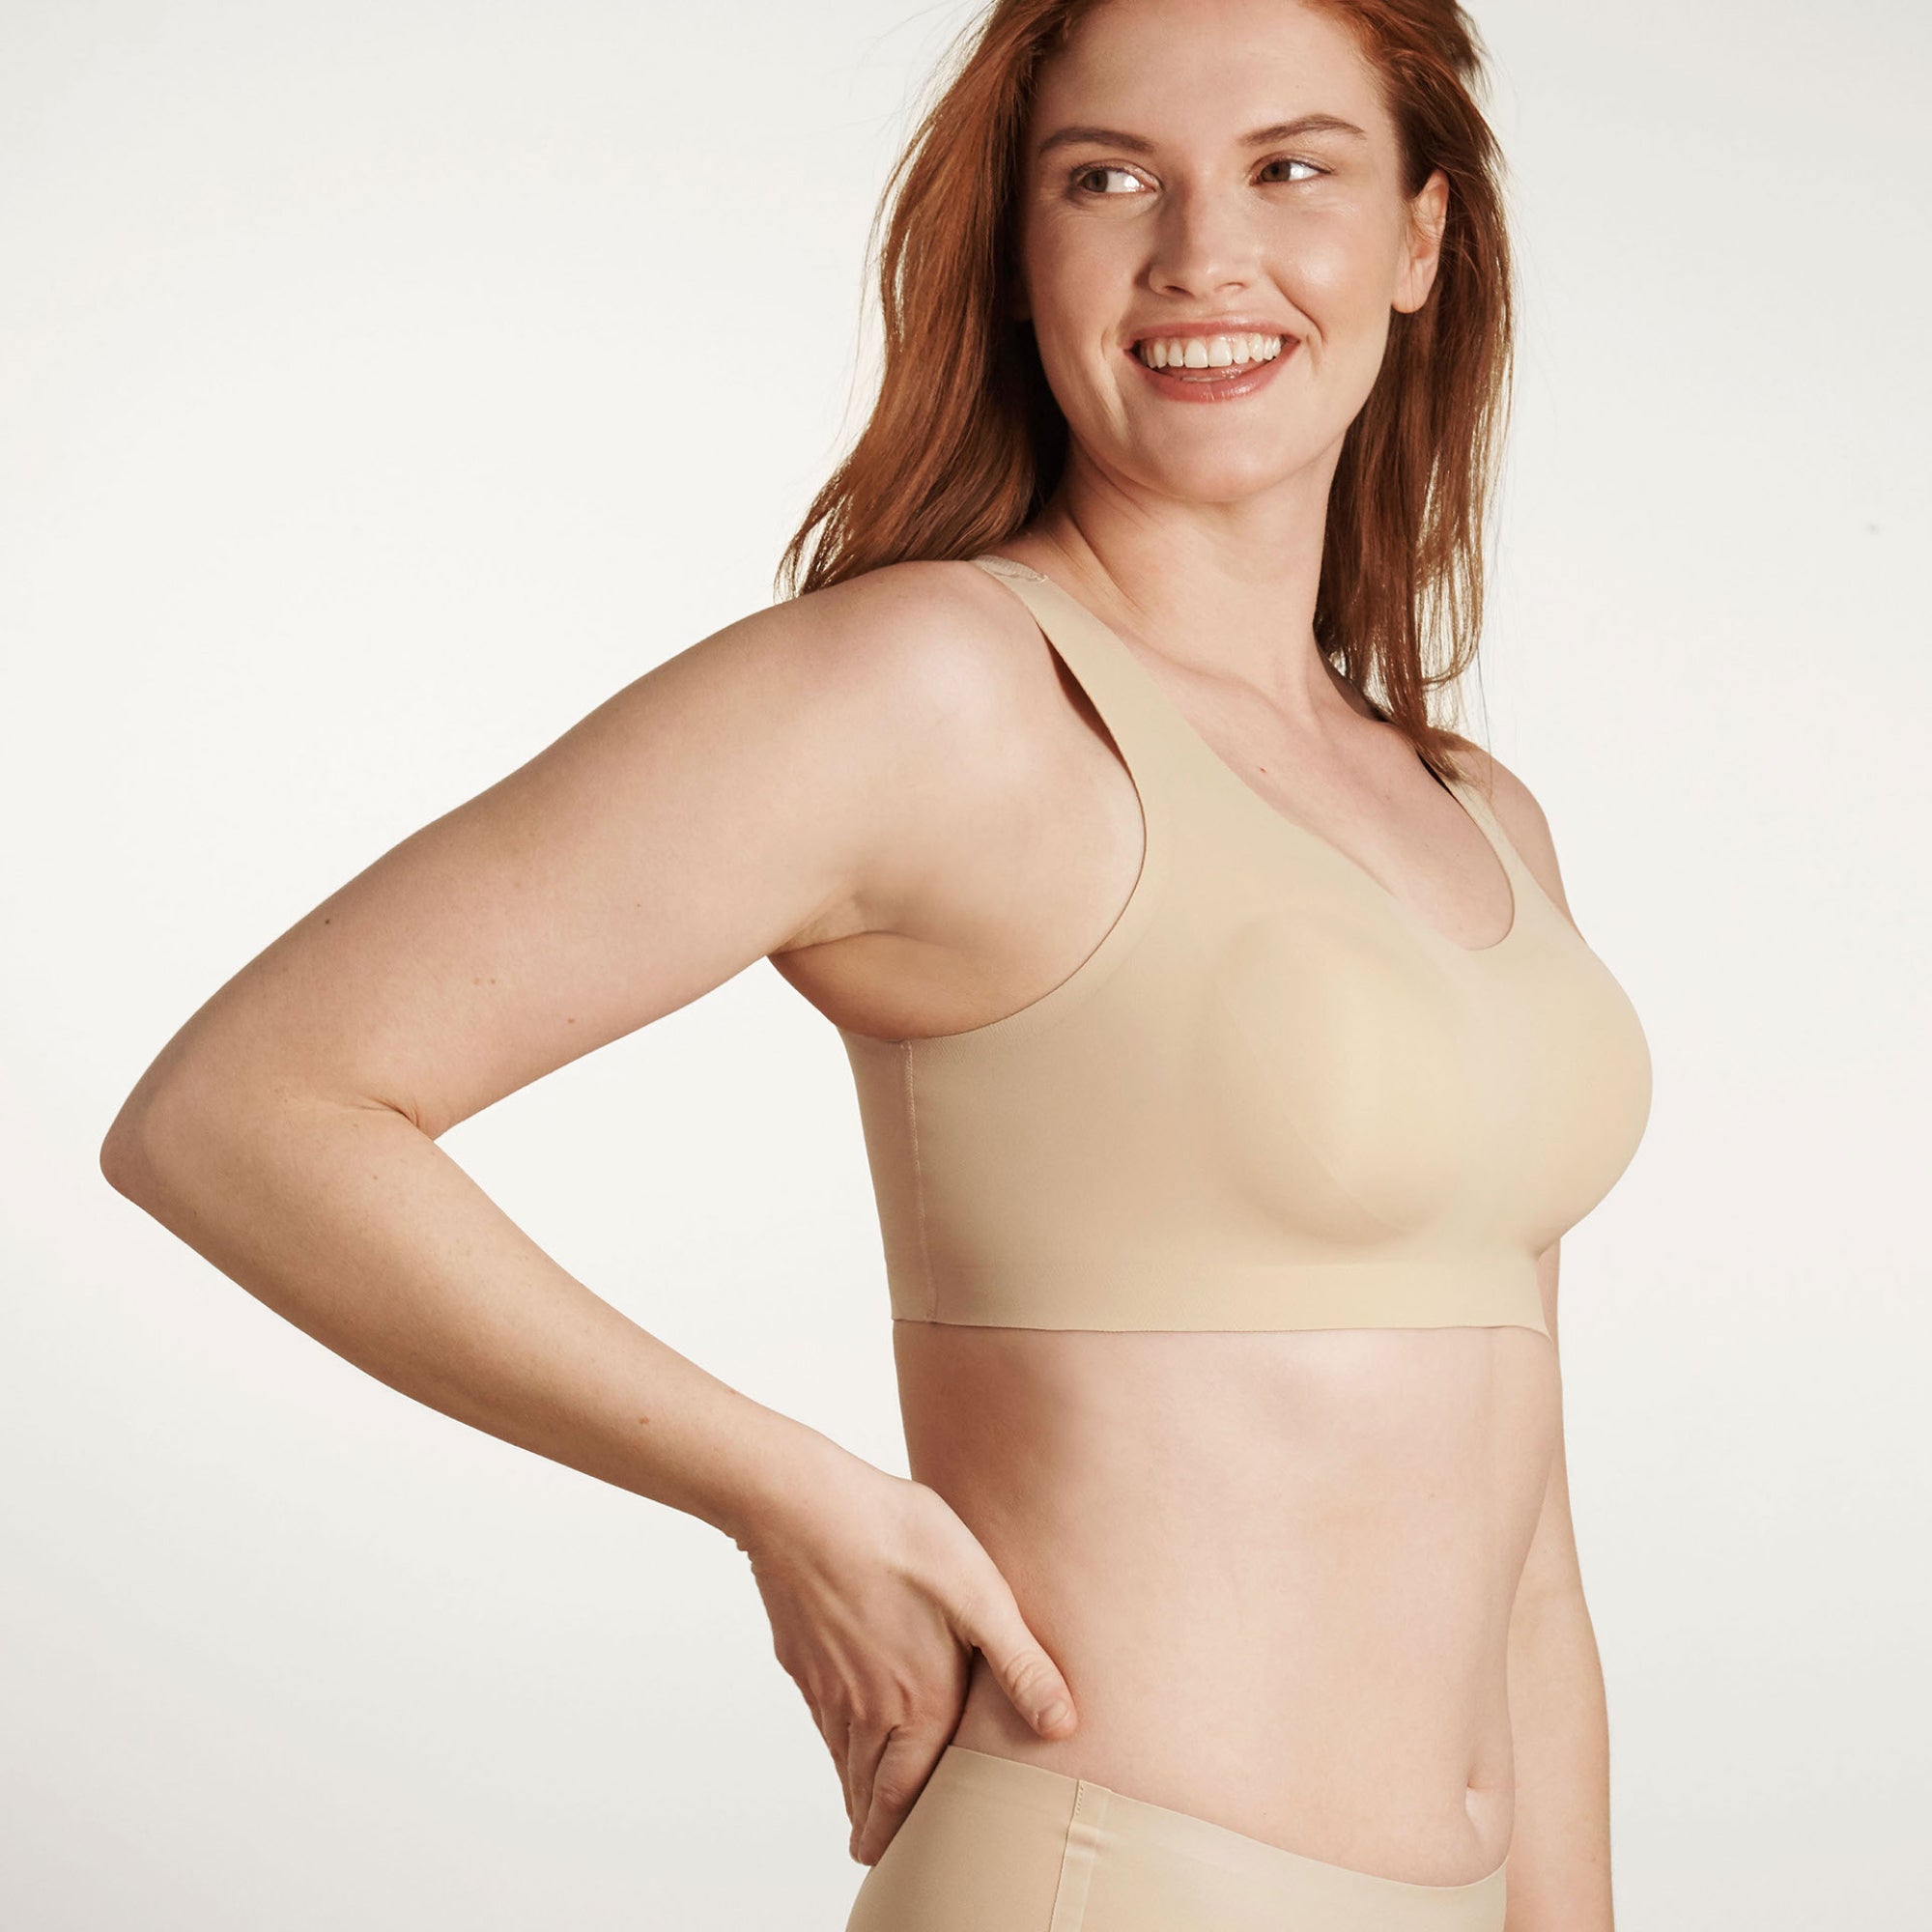 The First Innovation Since the Bra was Invented – The Bra Lab